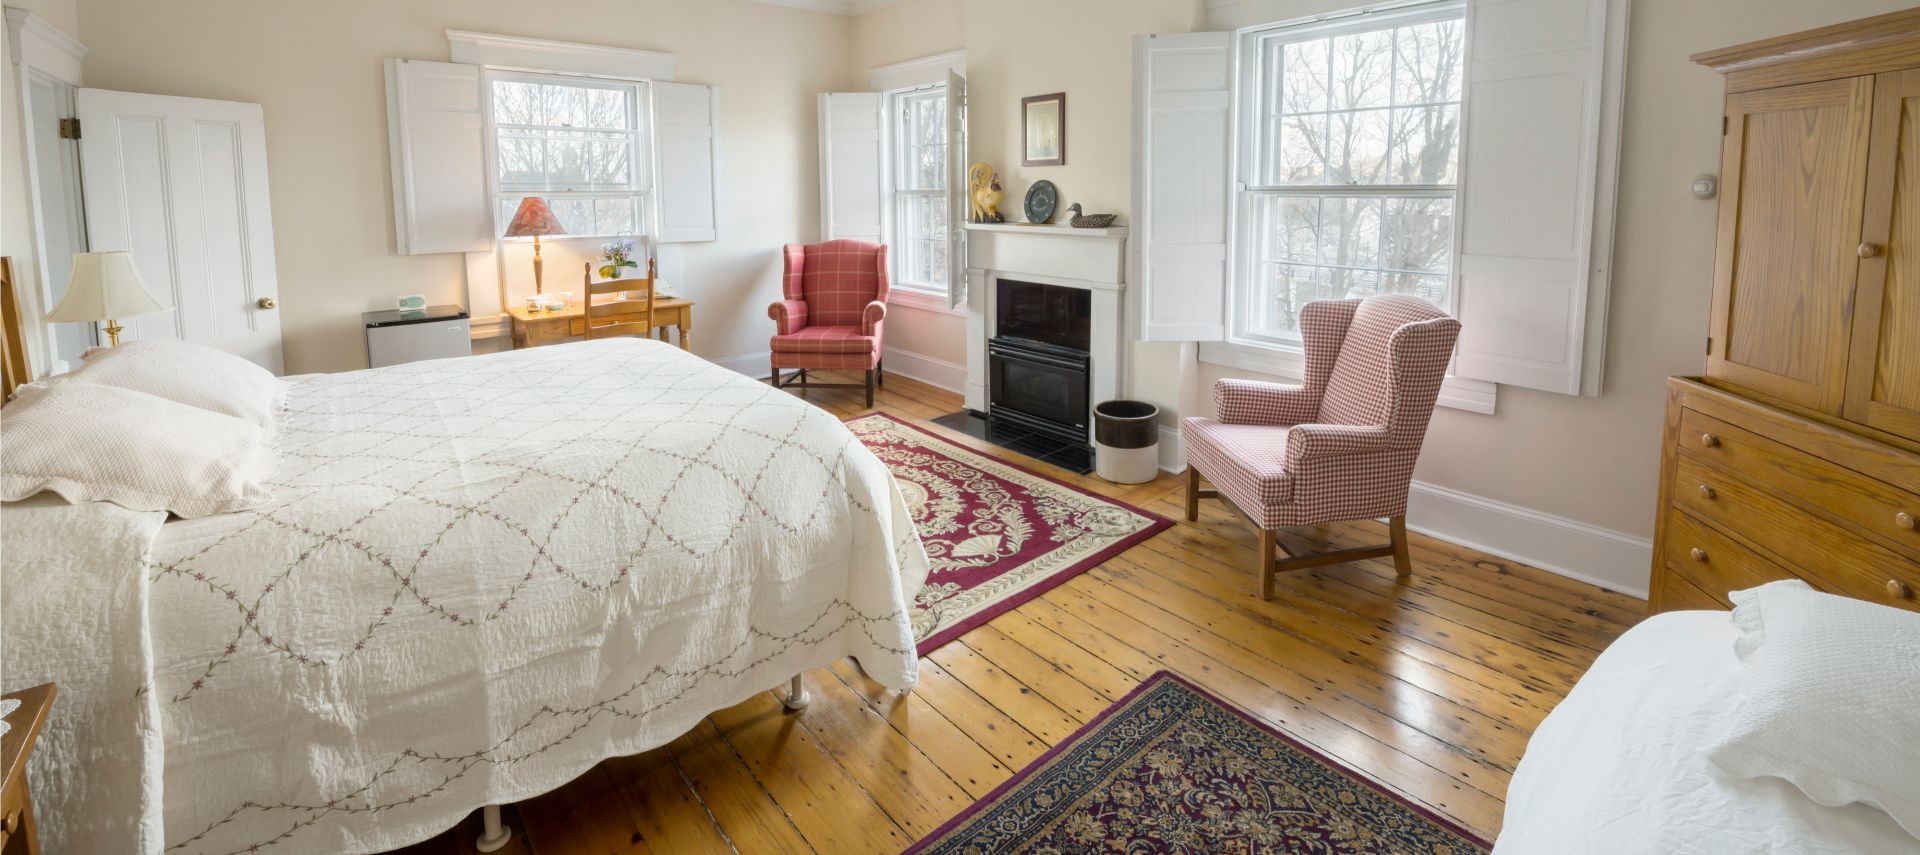 King and twin beds in a spacious bedroom with a wooden armoire and red wing back chairs.